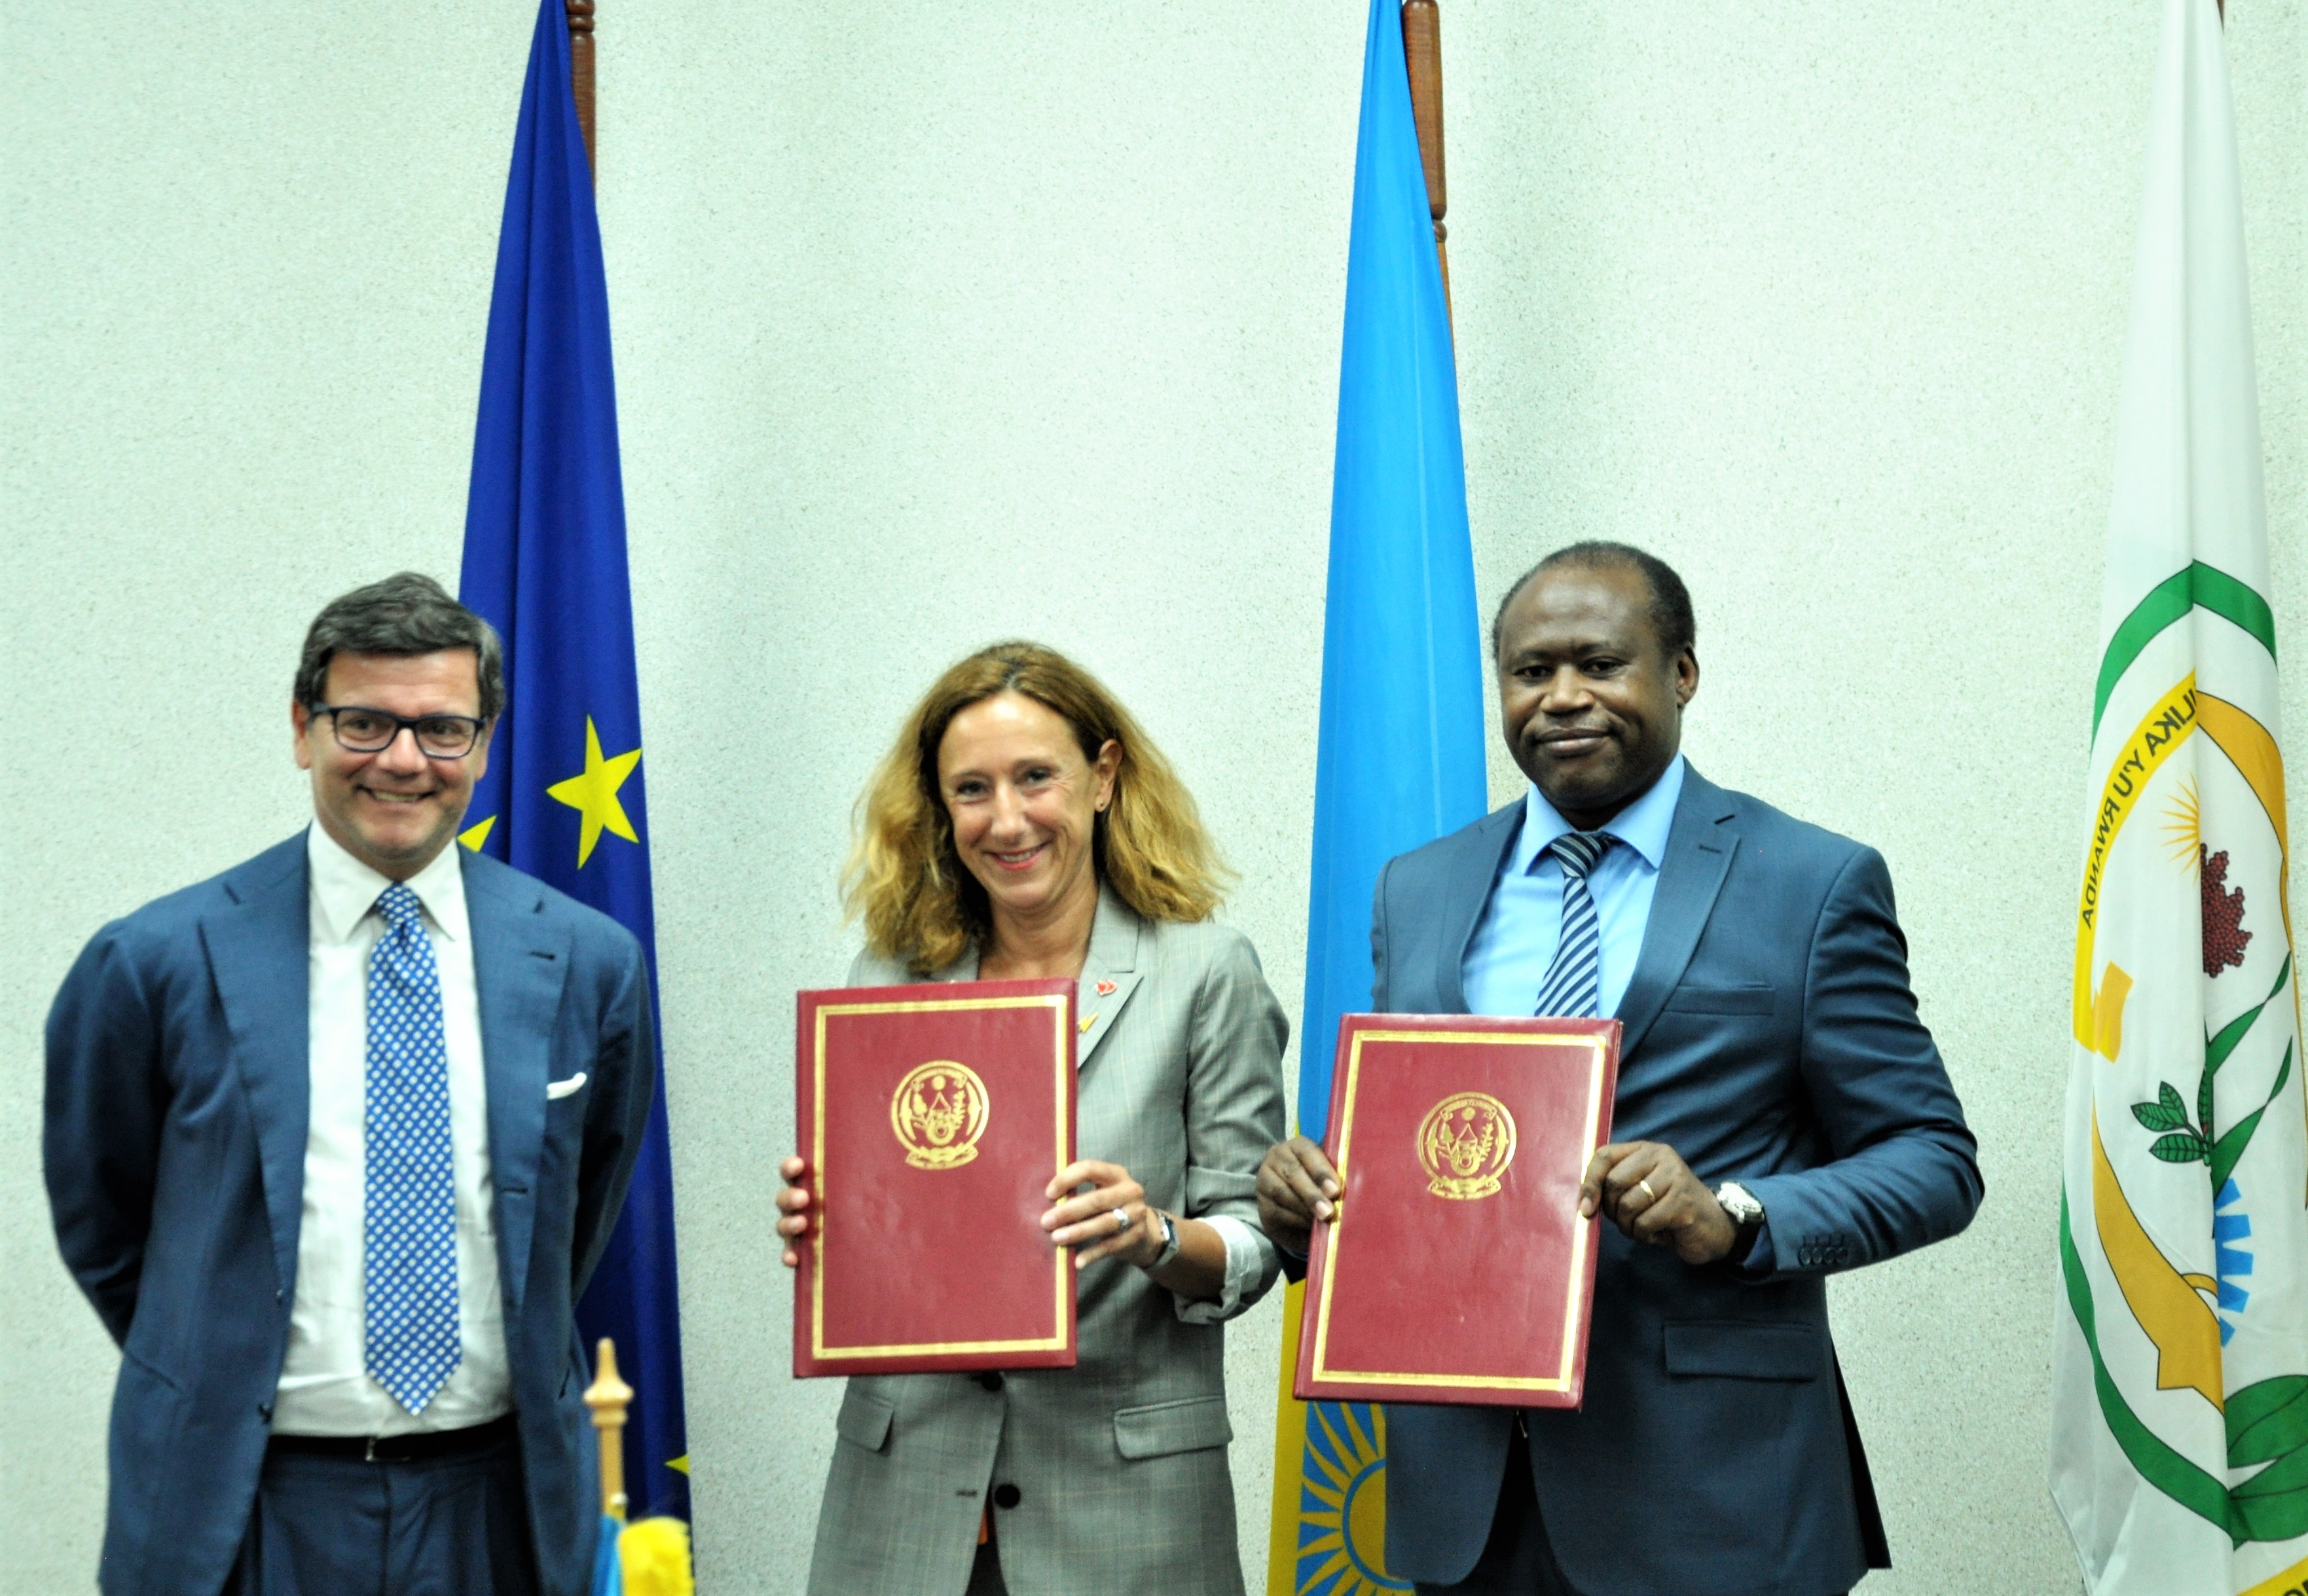  (L-R) EU Ambassador to Rwanda, Nicola Bellomo, Myriam Ferran, Deputy- Director General of the European Commissionu2019s Directorate General for International Partnerships and Minister of Finance and Economic planning Uzziel Ndagijimana during the signing ceremony in Kigali on May 18,2022. Courtesy